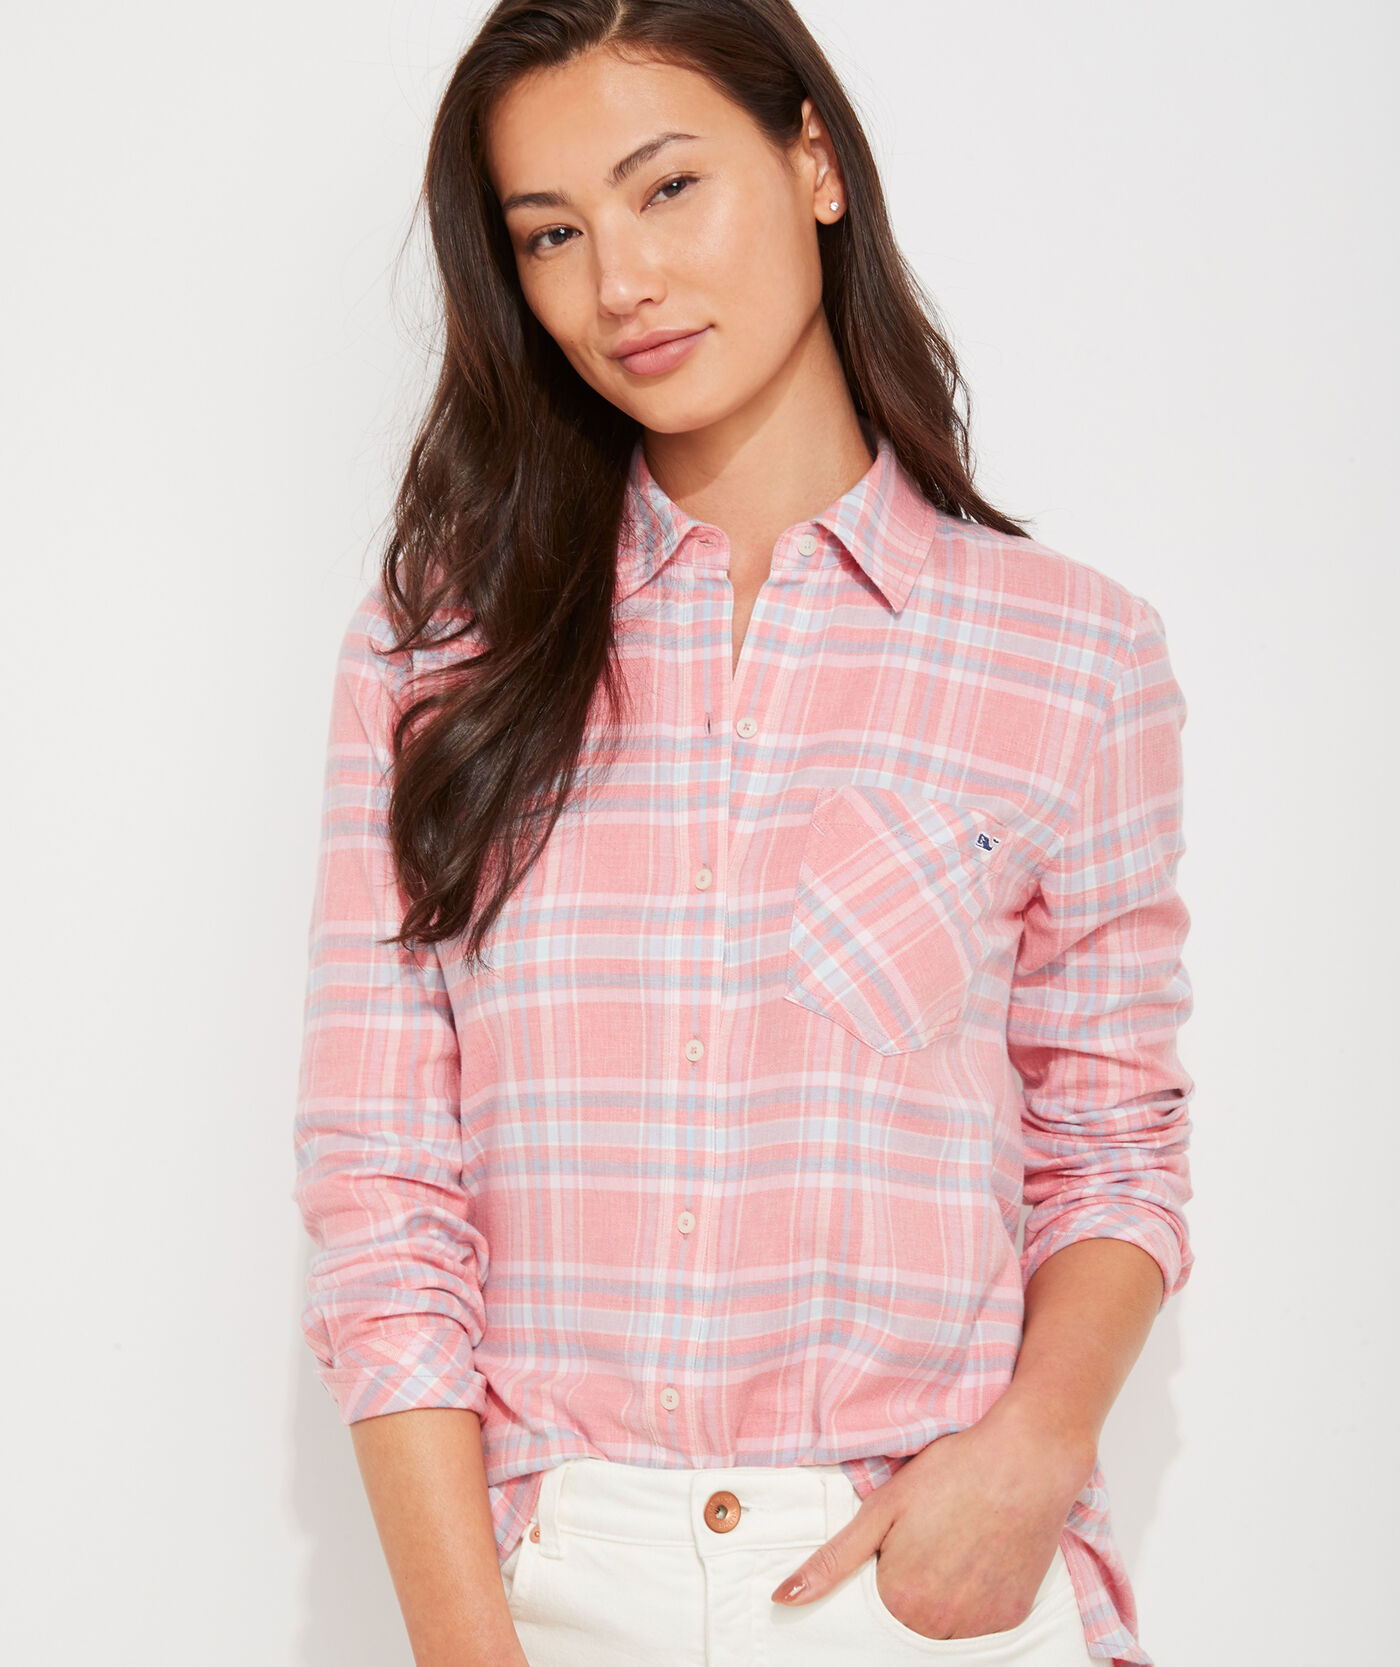 Shop Plaid Chilmark Relaxed Button-Down at vineyard vines